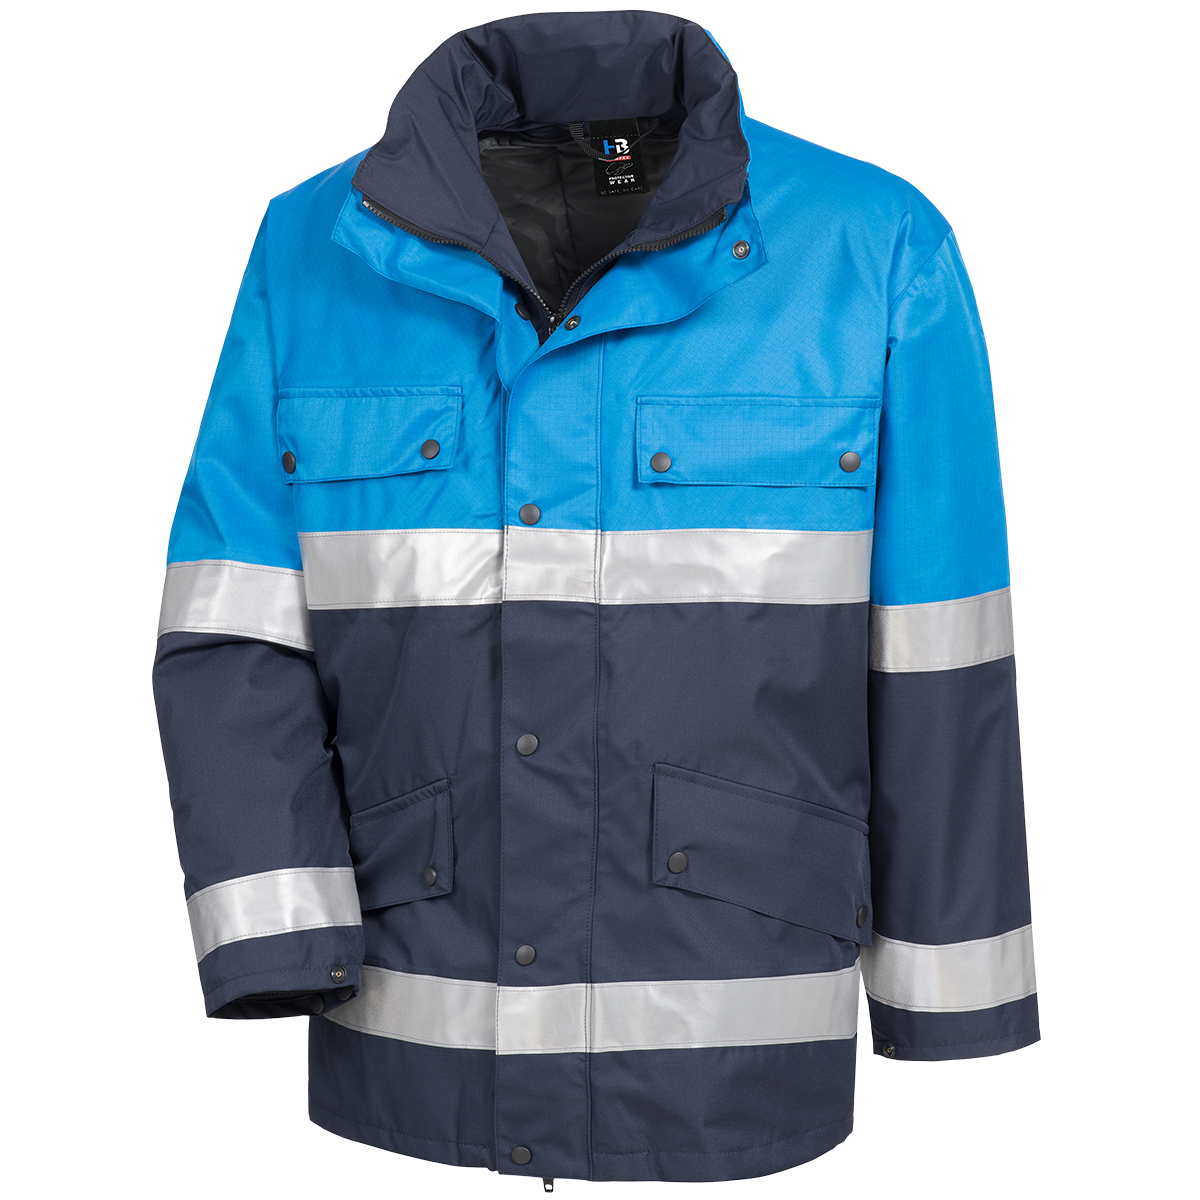 Parka incl. Quilted Jacket | HB Protective Wear GmbH u0026 Co. KG